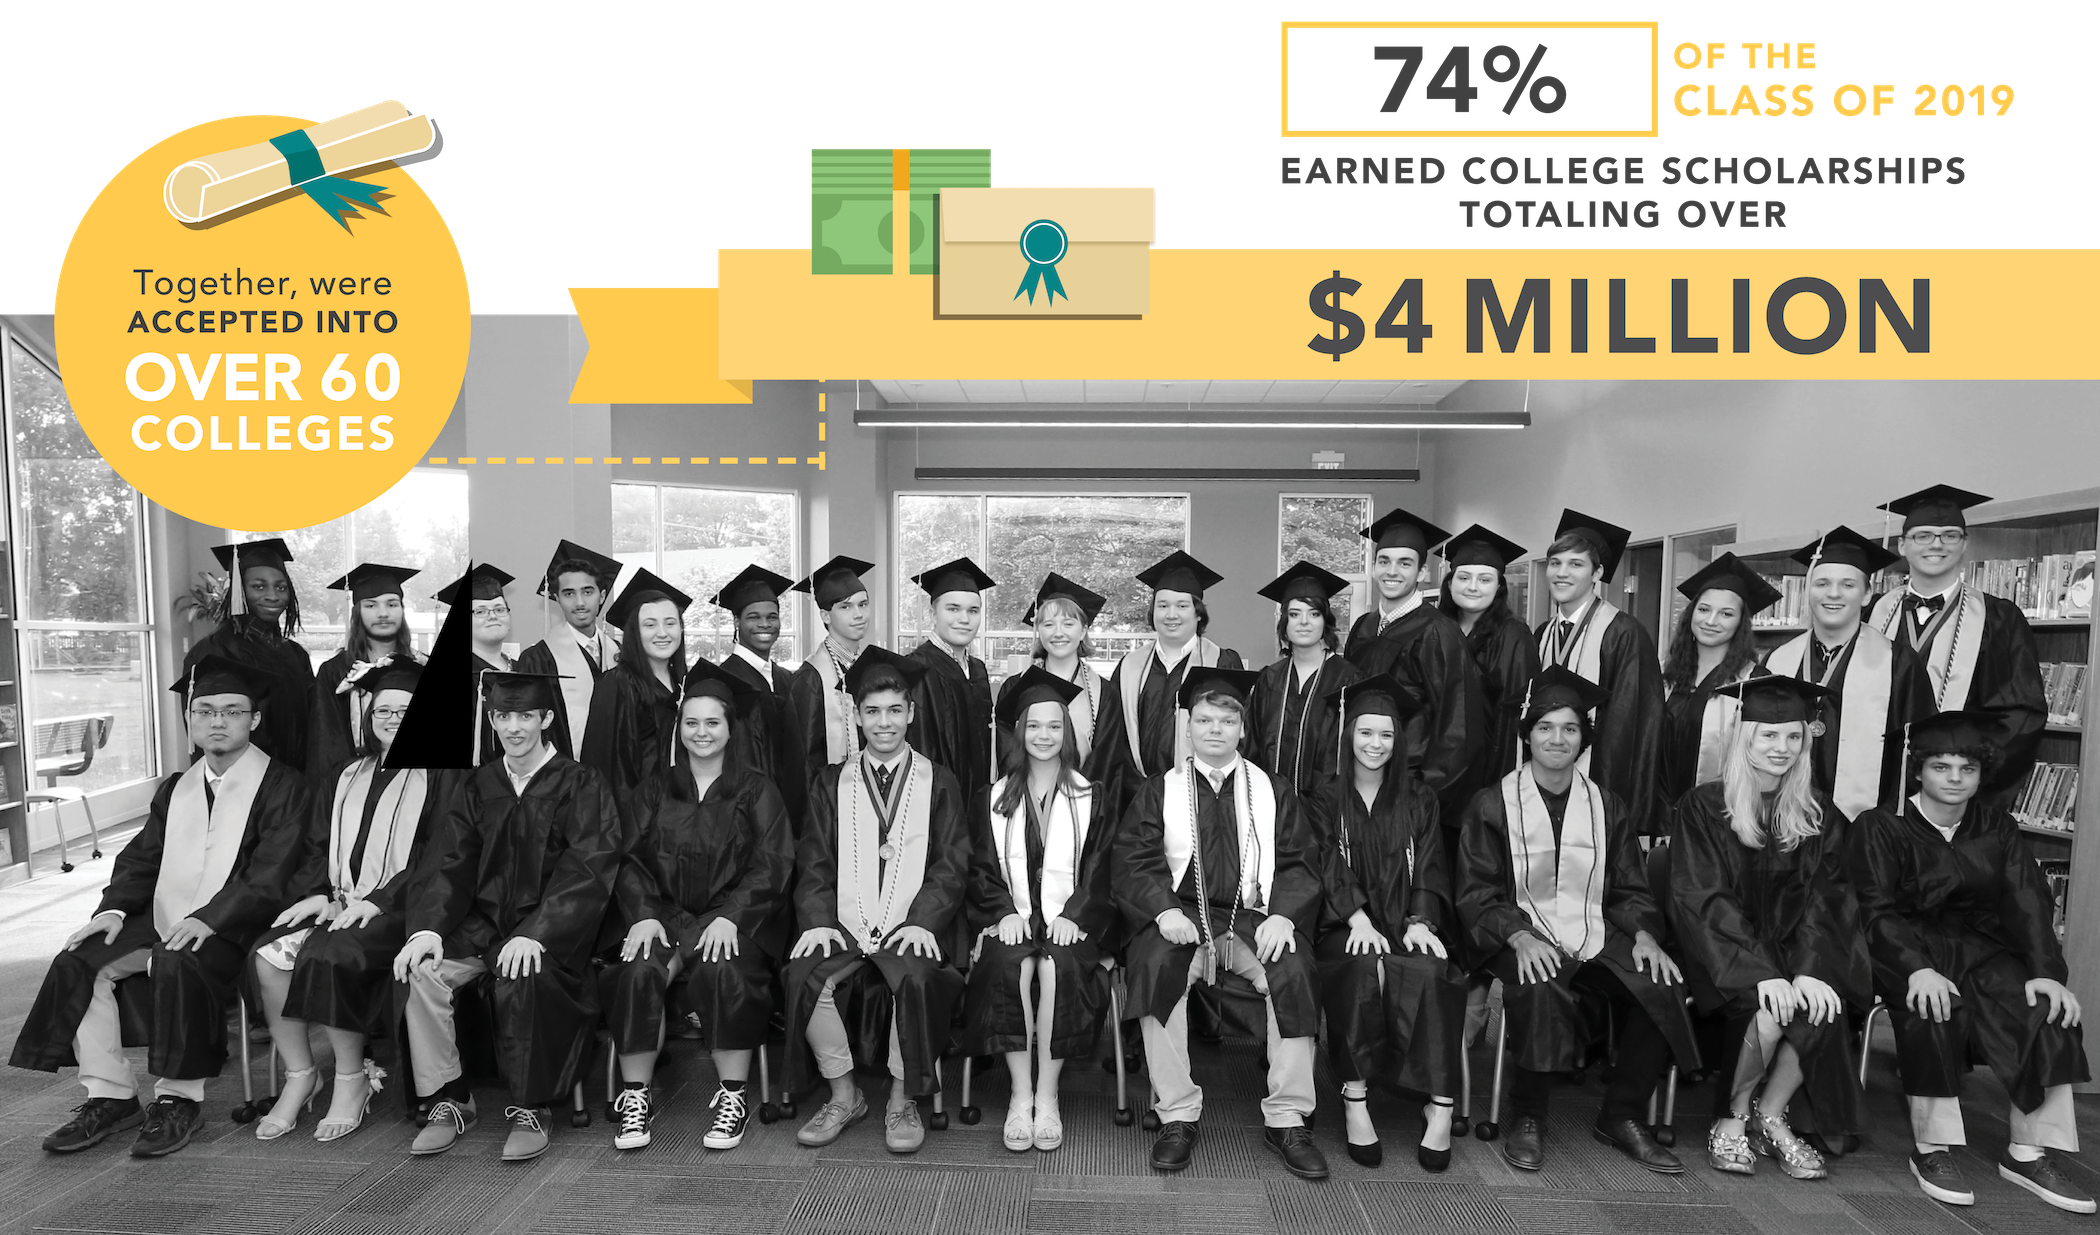 Class of 2019_Graduate scholarship stats_web graphic.png